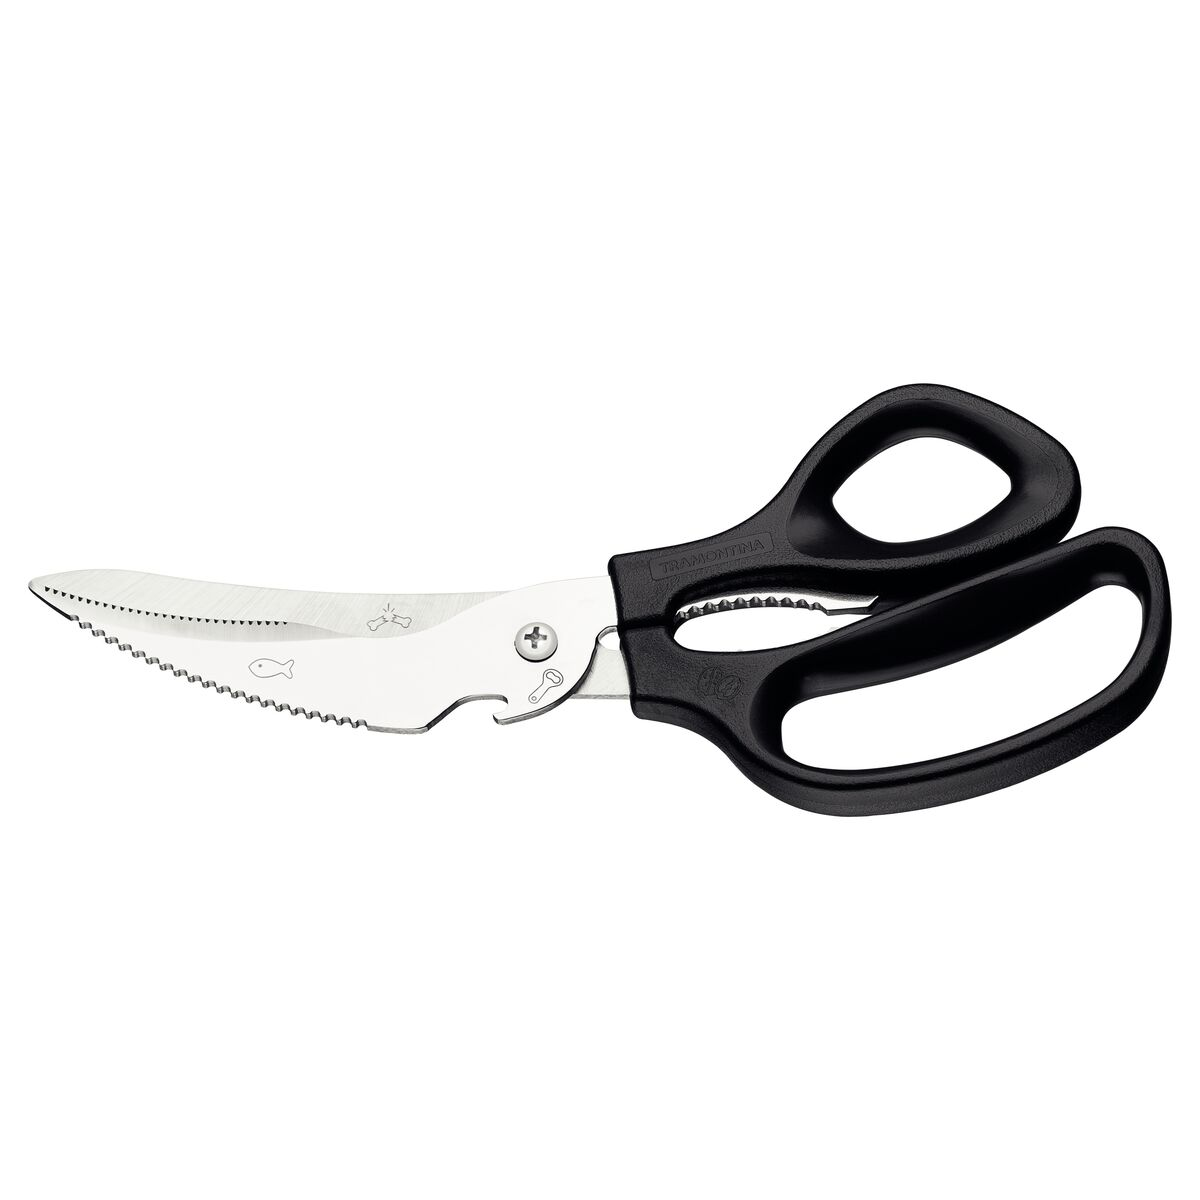 Tramontina Carving Scissors with Stainless-Steel Blades and Onyx Polypropylene Handle, 8"